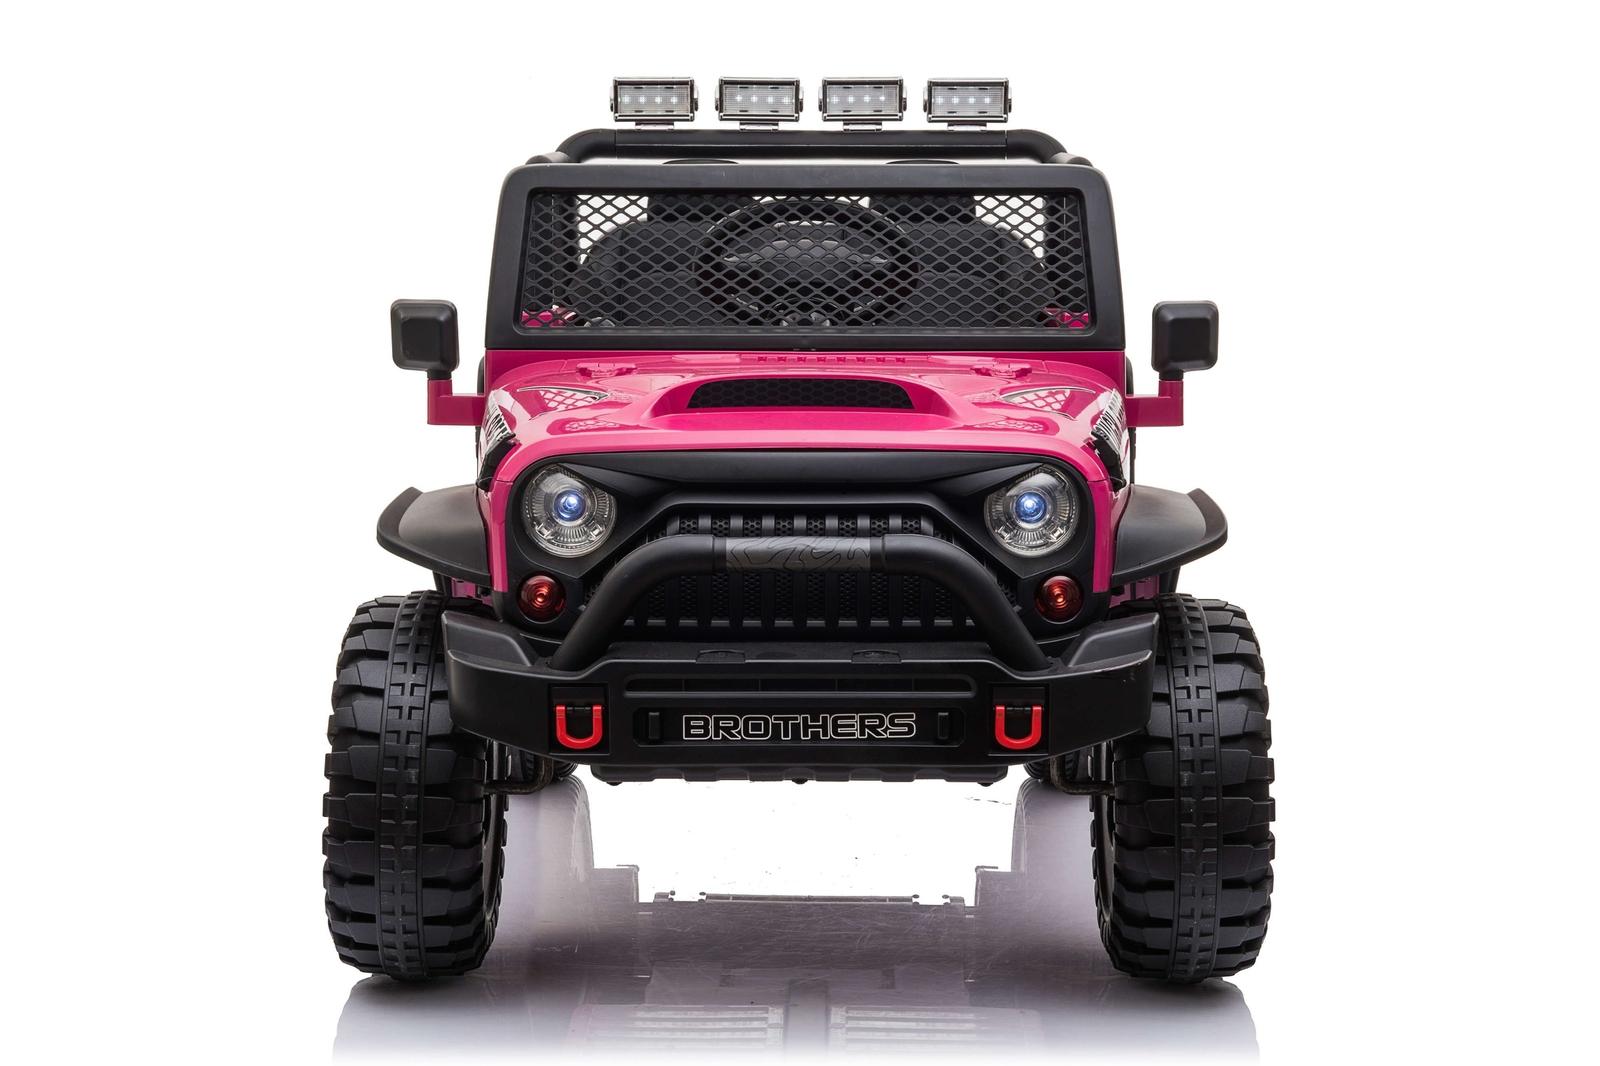 Childrens Ride On/Off Road Jeep Vehicle